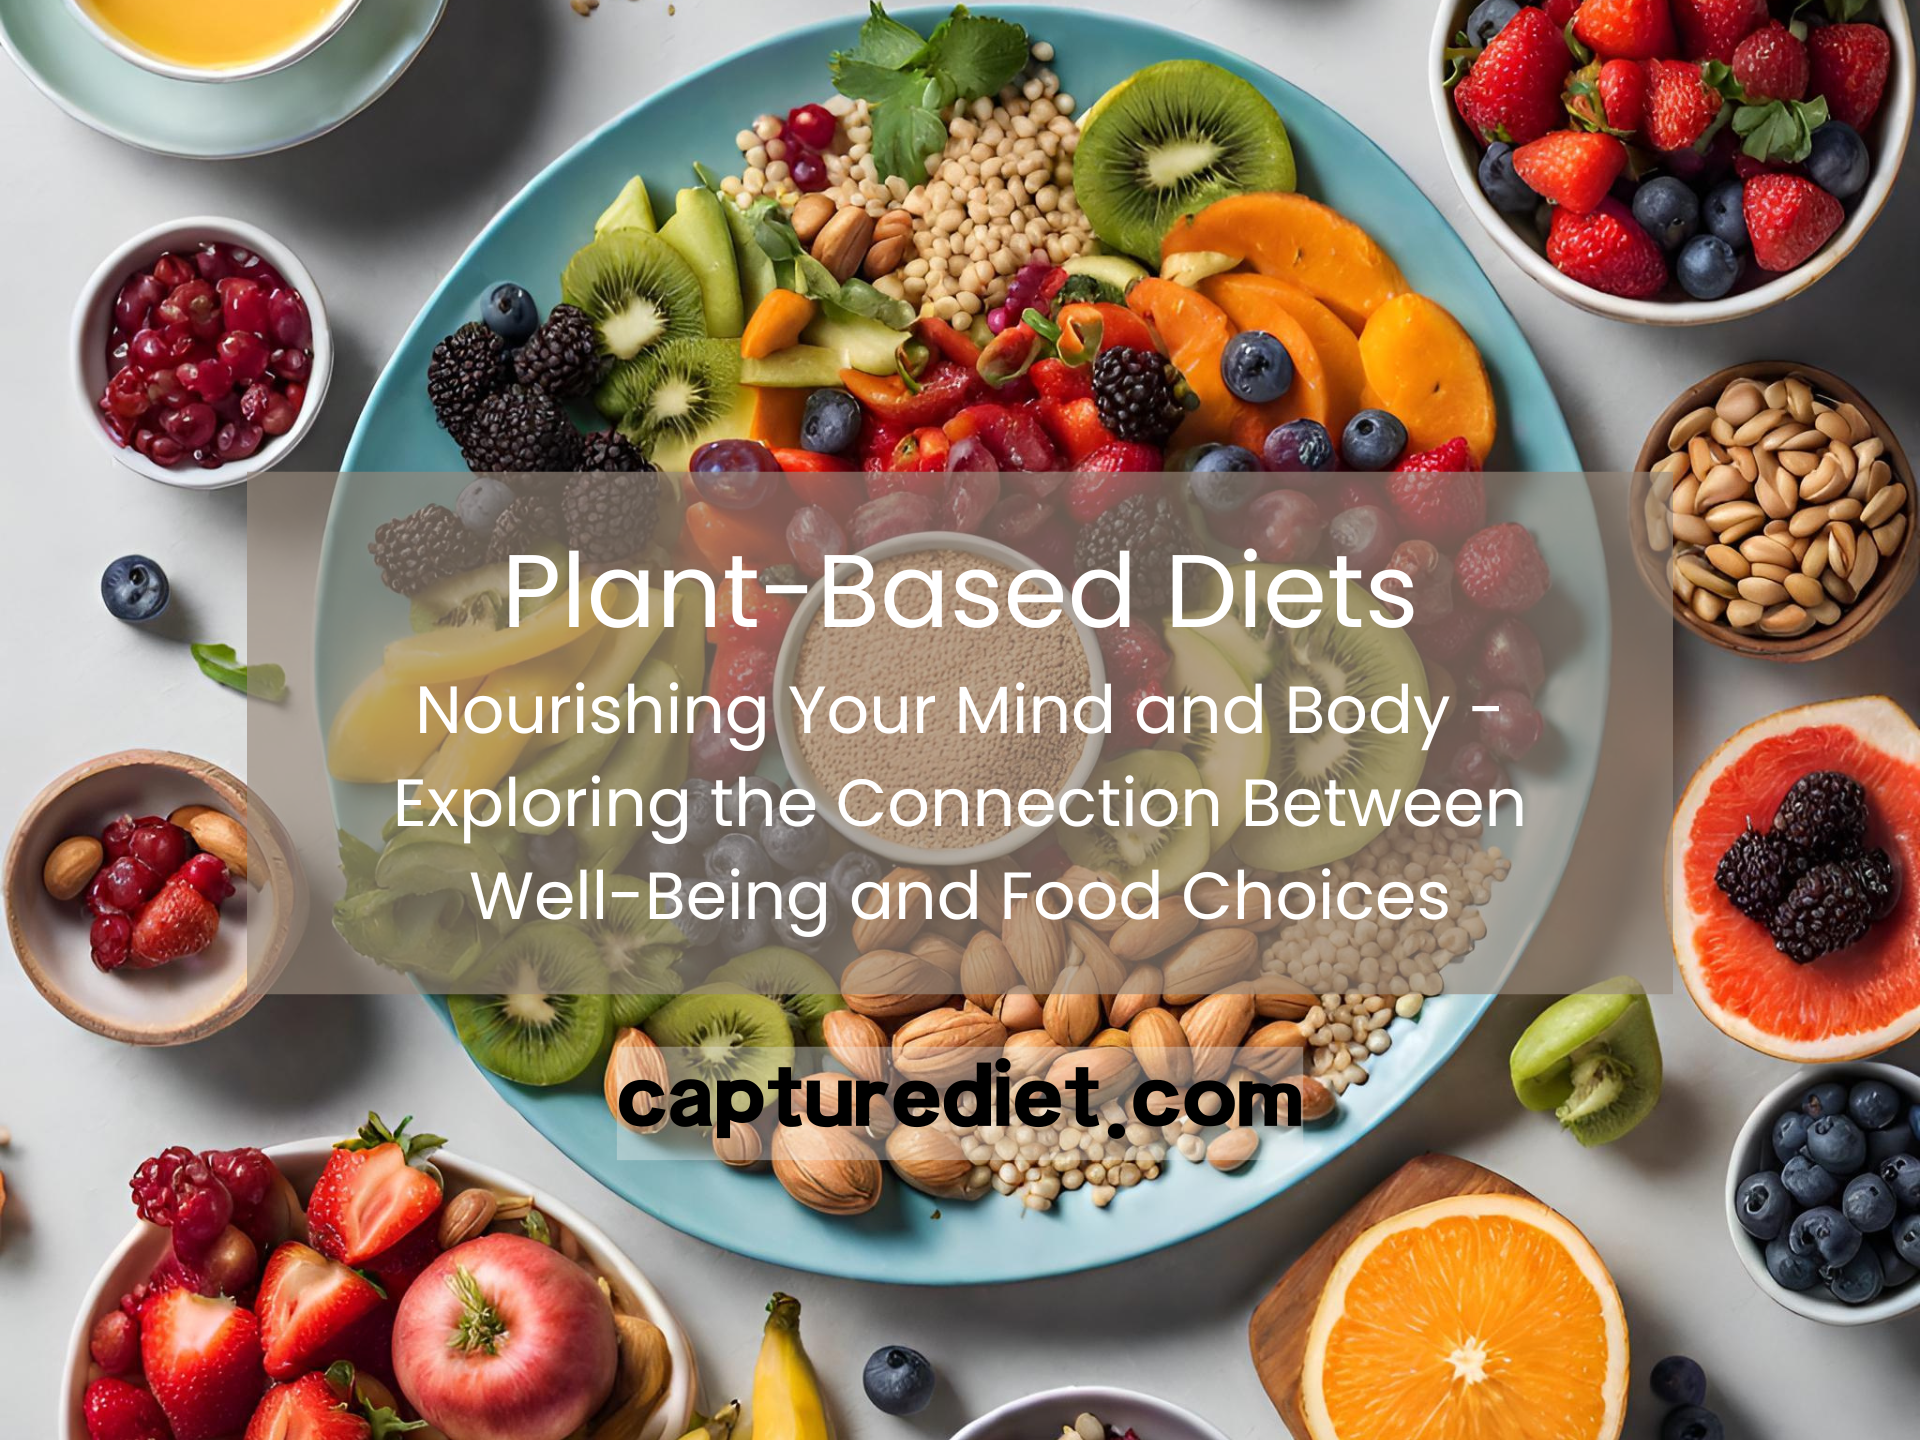 Plant-Based Diets